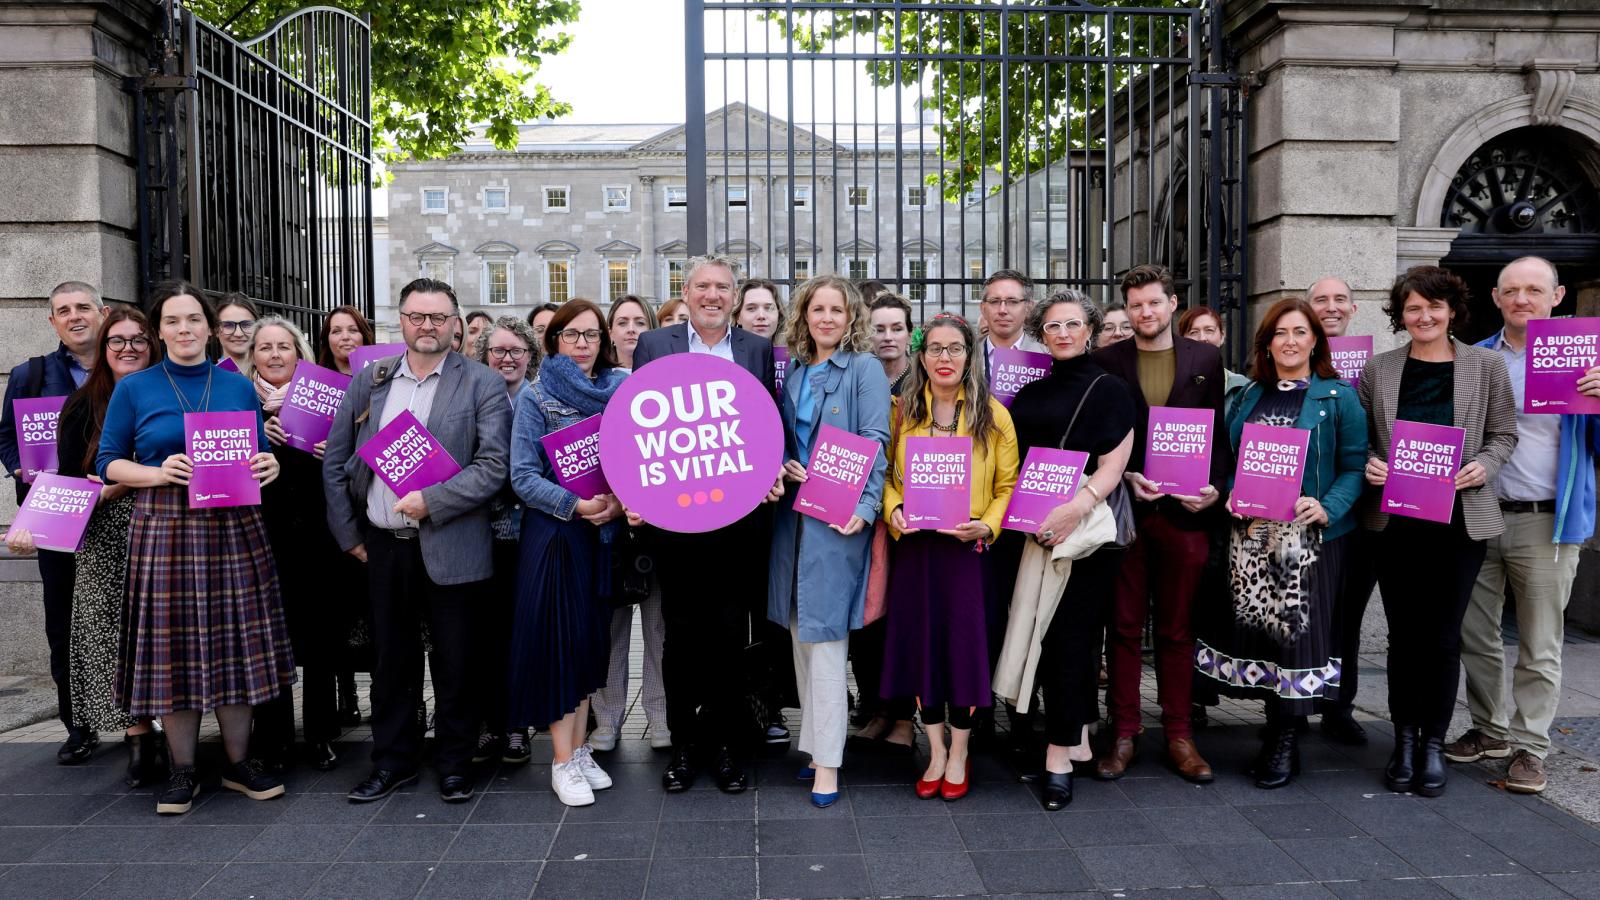 A group of sector workers gathered outside Leinster House in support of A Budget for Civil Society